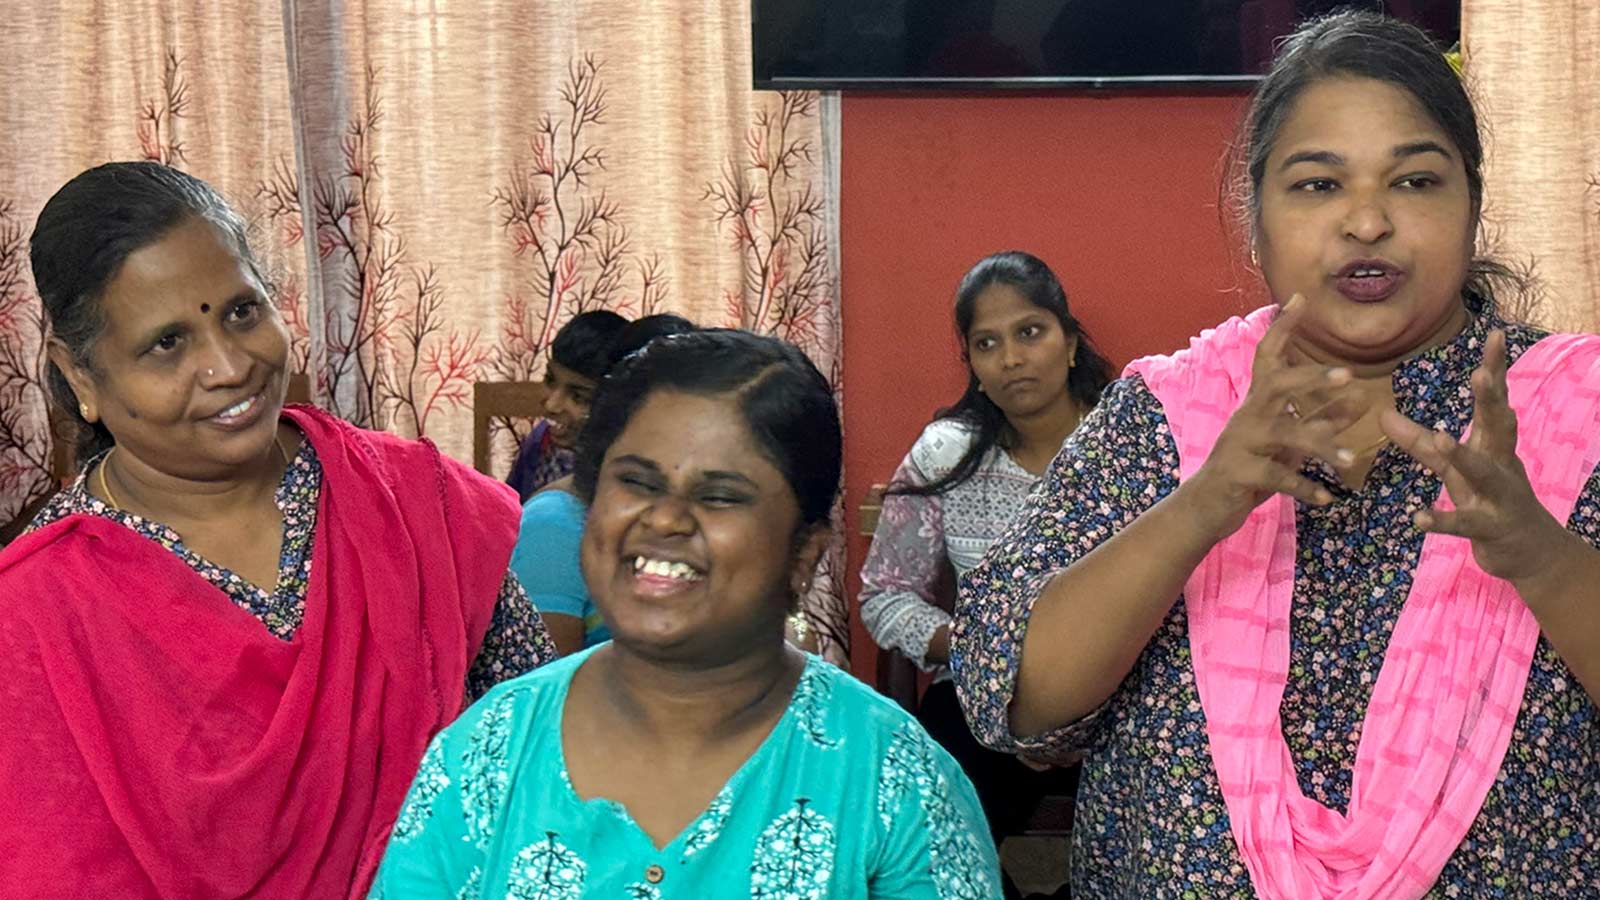 Caregivers and a teen girl with disabilities in India